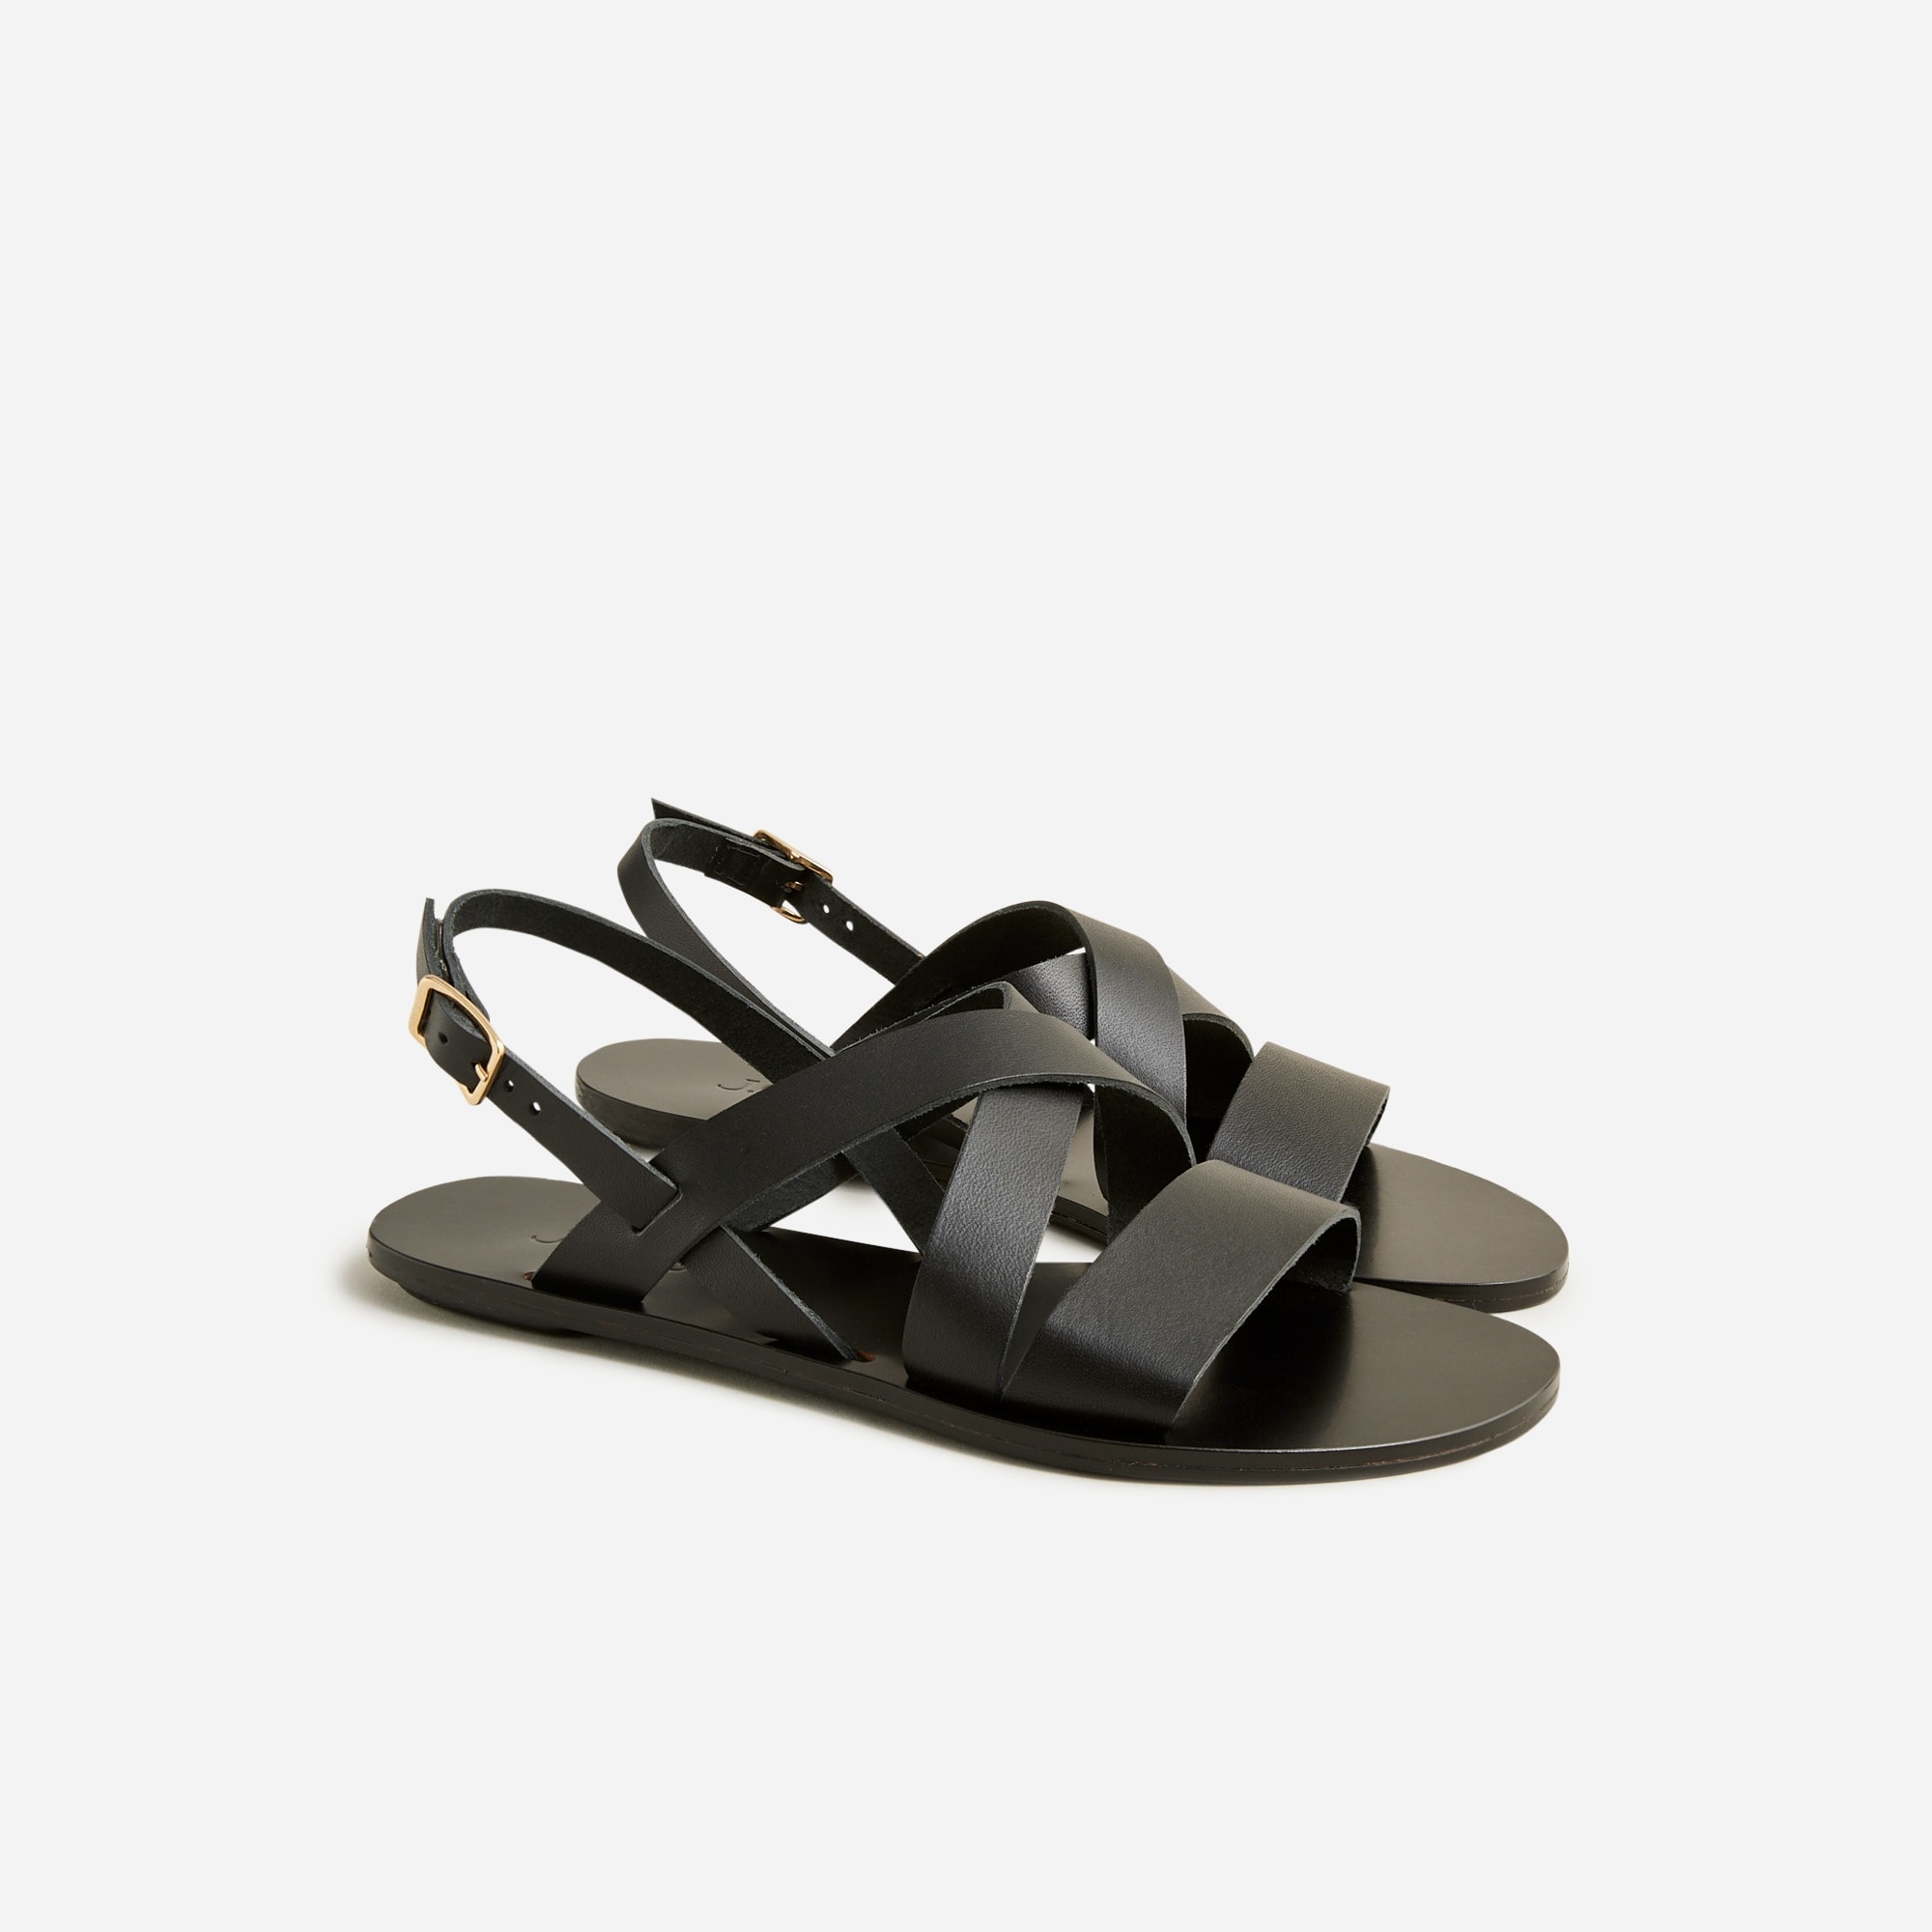 womens Carsen made-in-Italy slingback sandals in leather